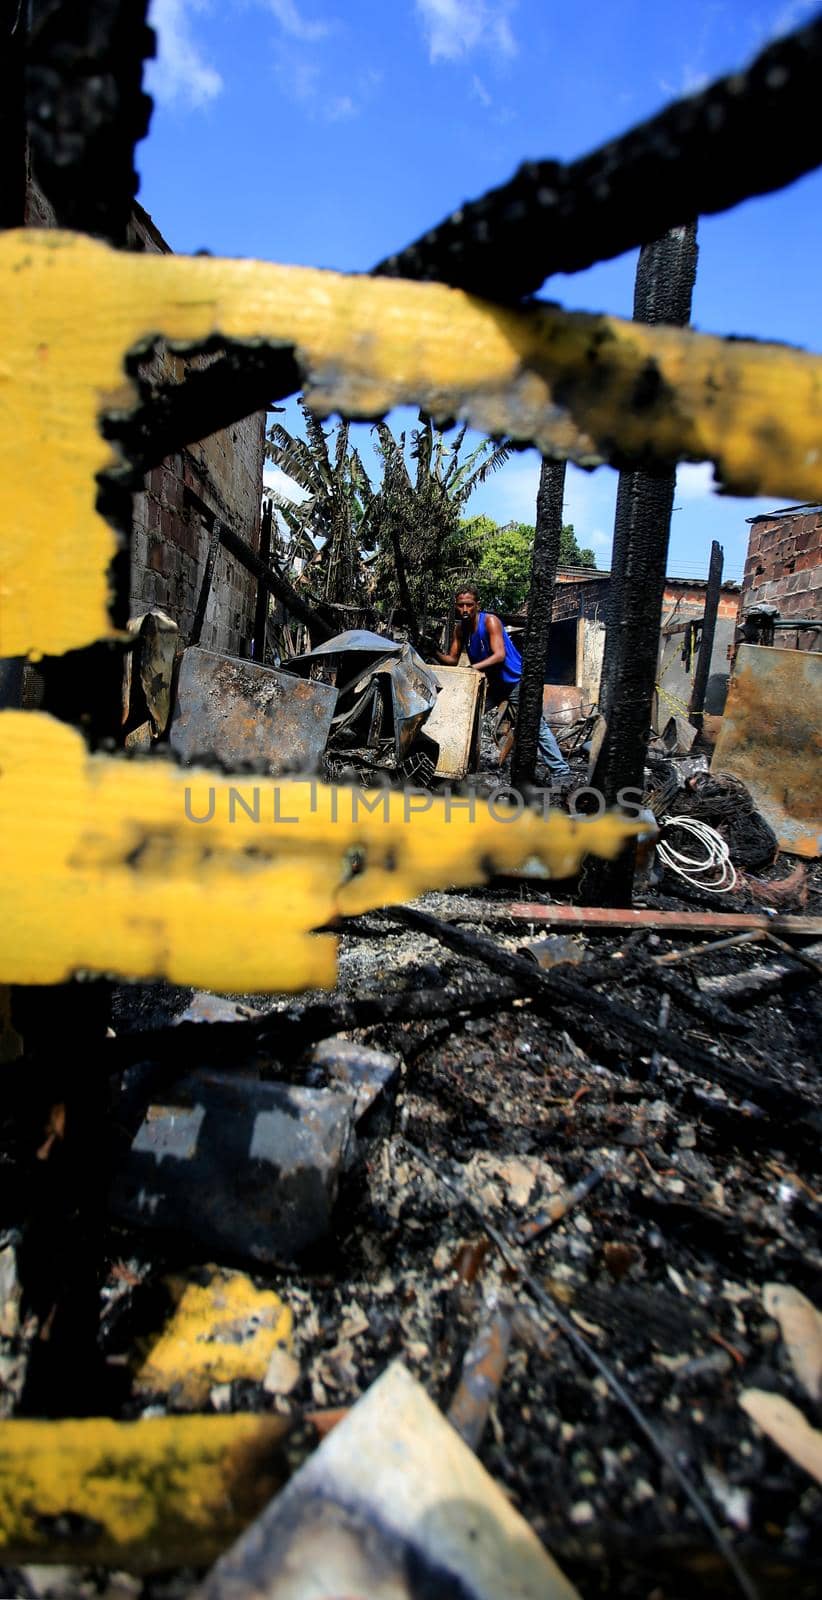 salvador, bahia / brazil - october 22, 2015: View of houses burned down by drug traffickers in the town known as Cidade de Plástico in the Periperi neighborhood of Salvador.